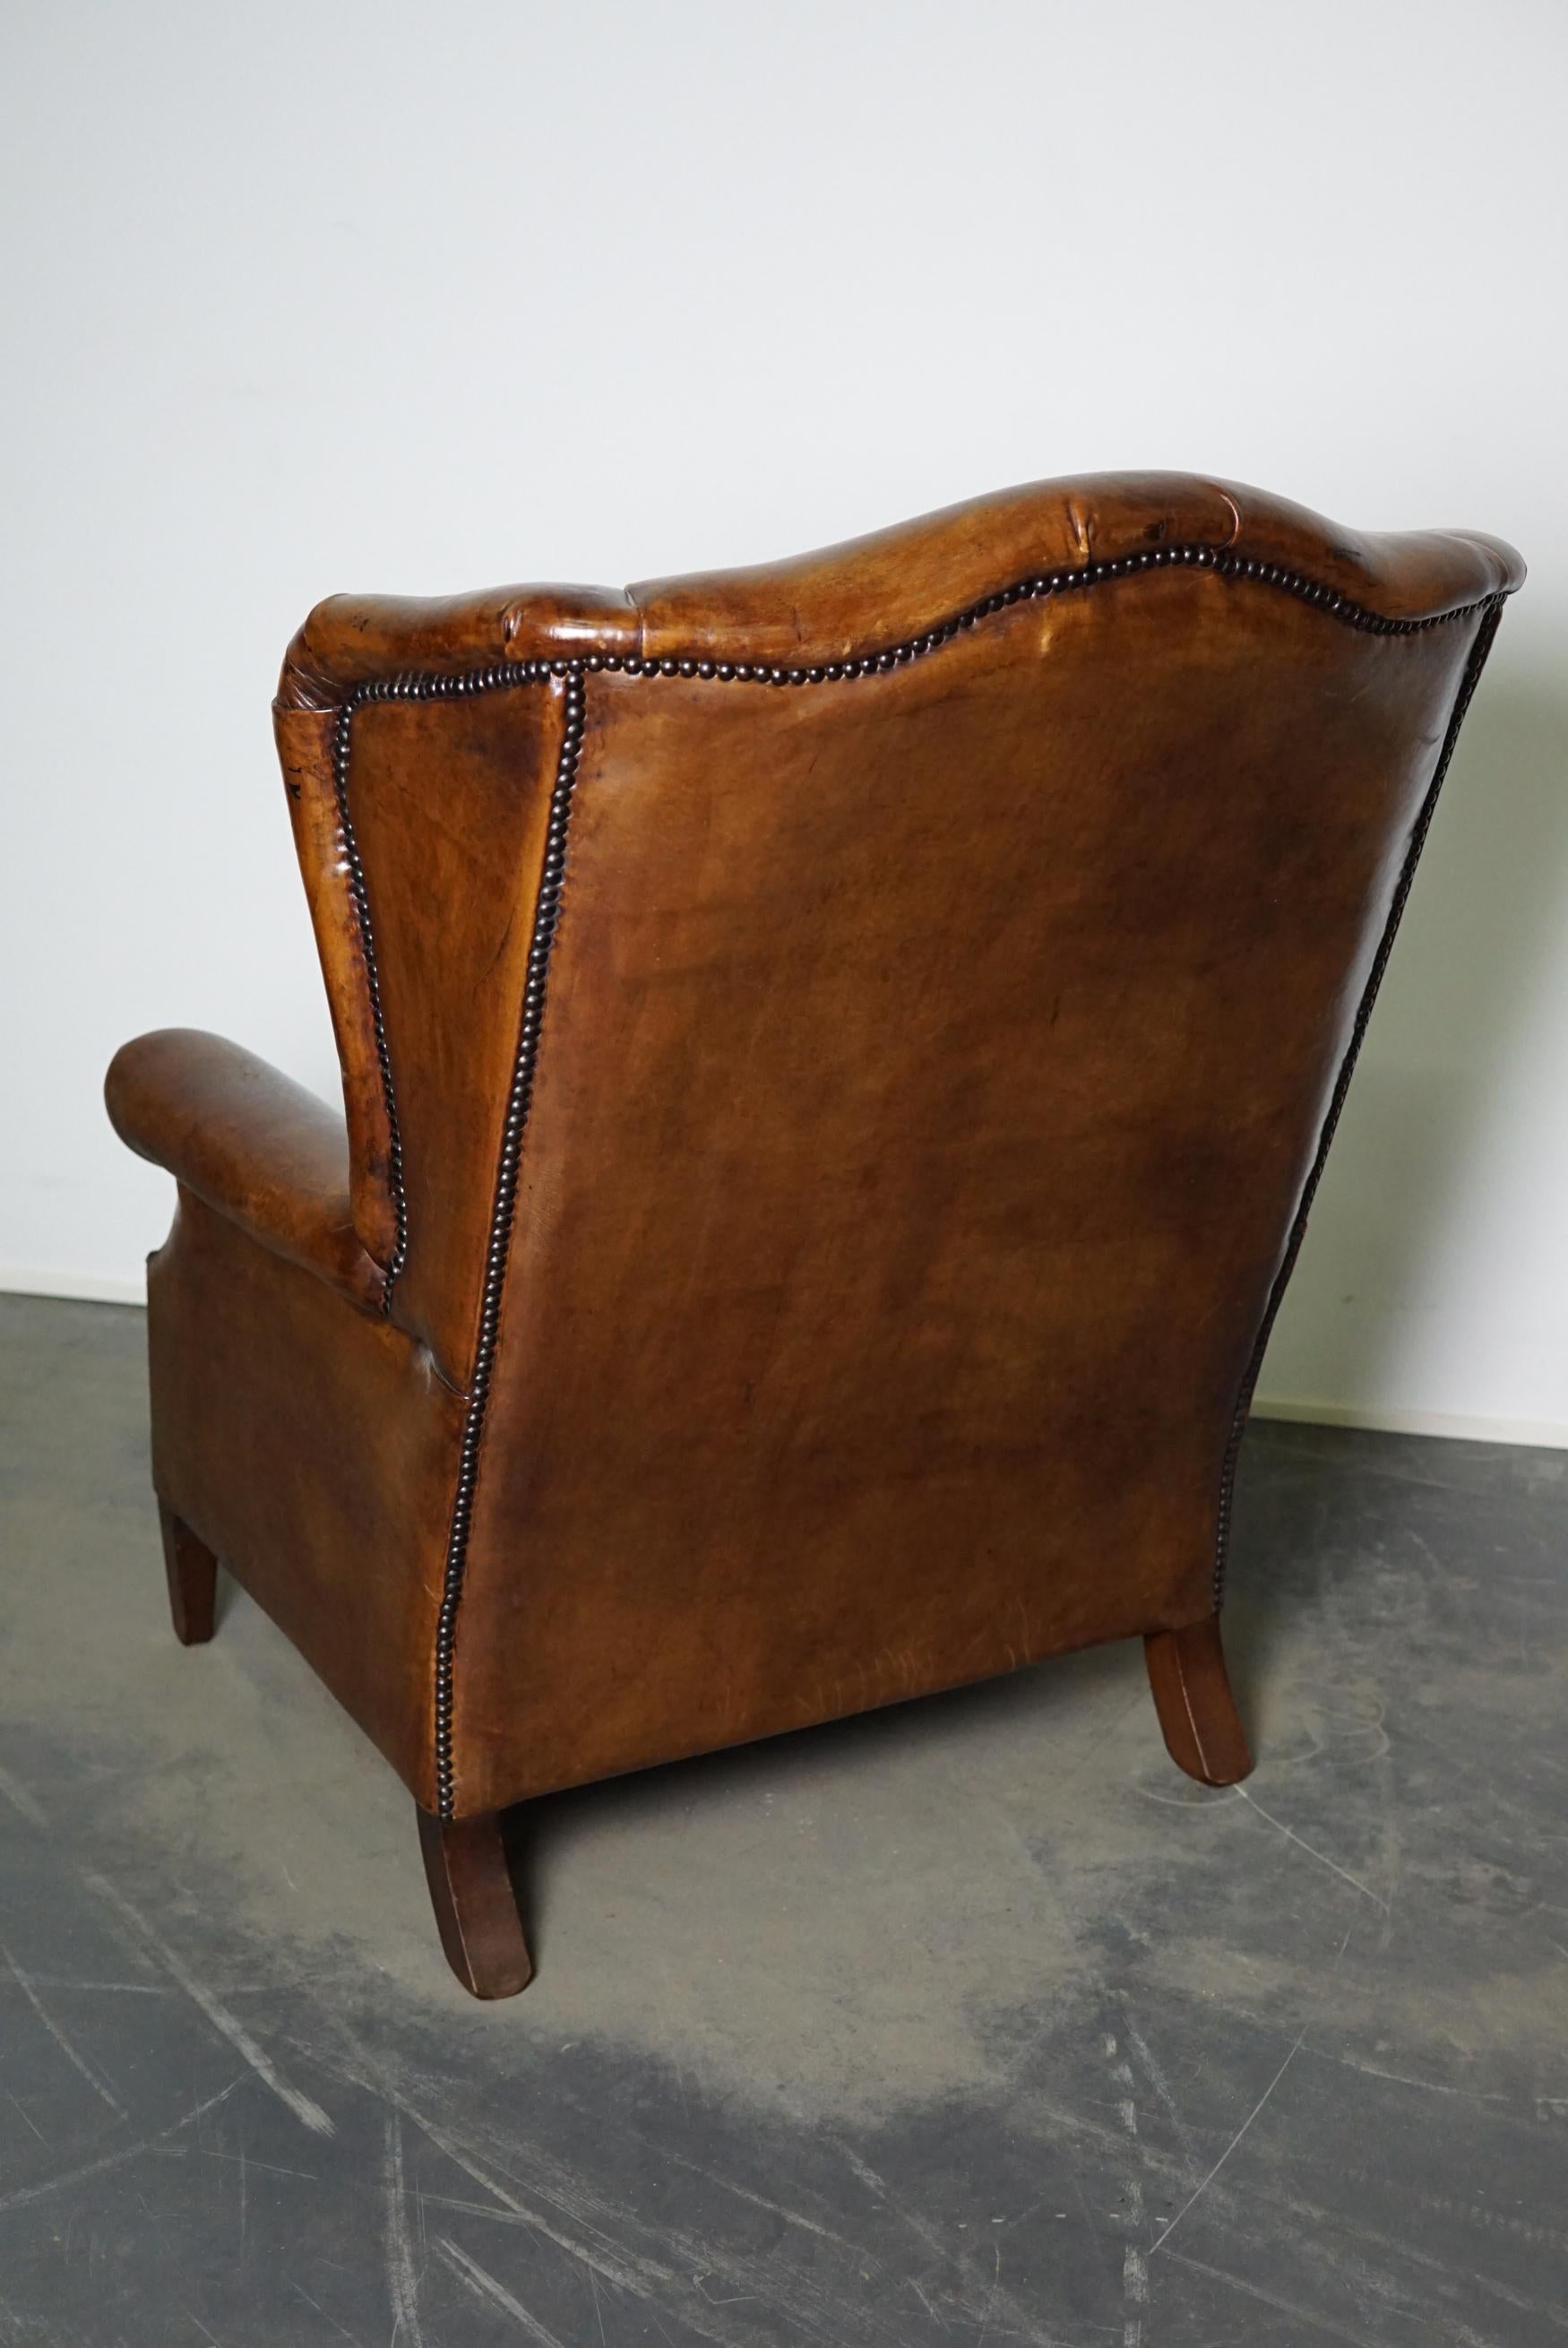 Late 20th Century Vintage Dutch Cognac-Colored Leather Club Chair